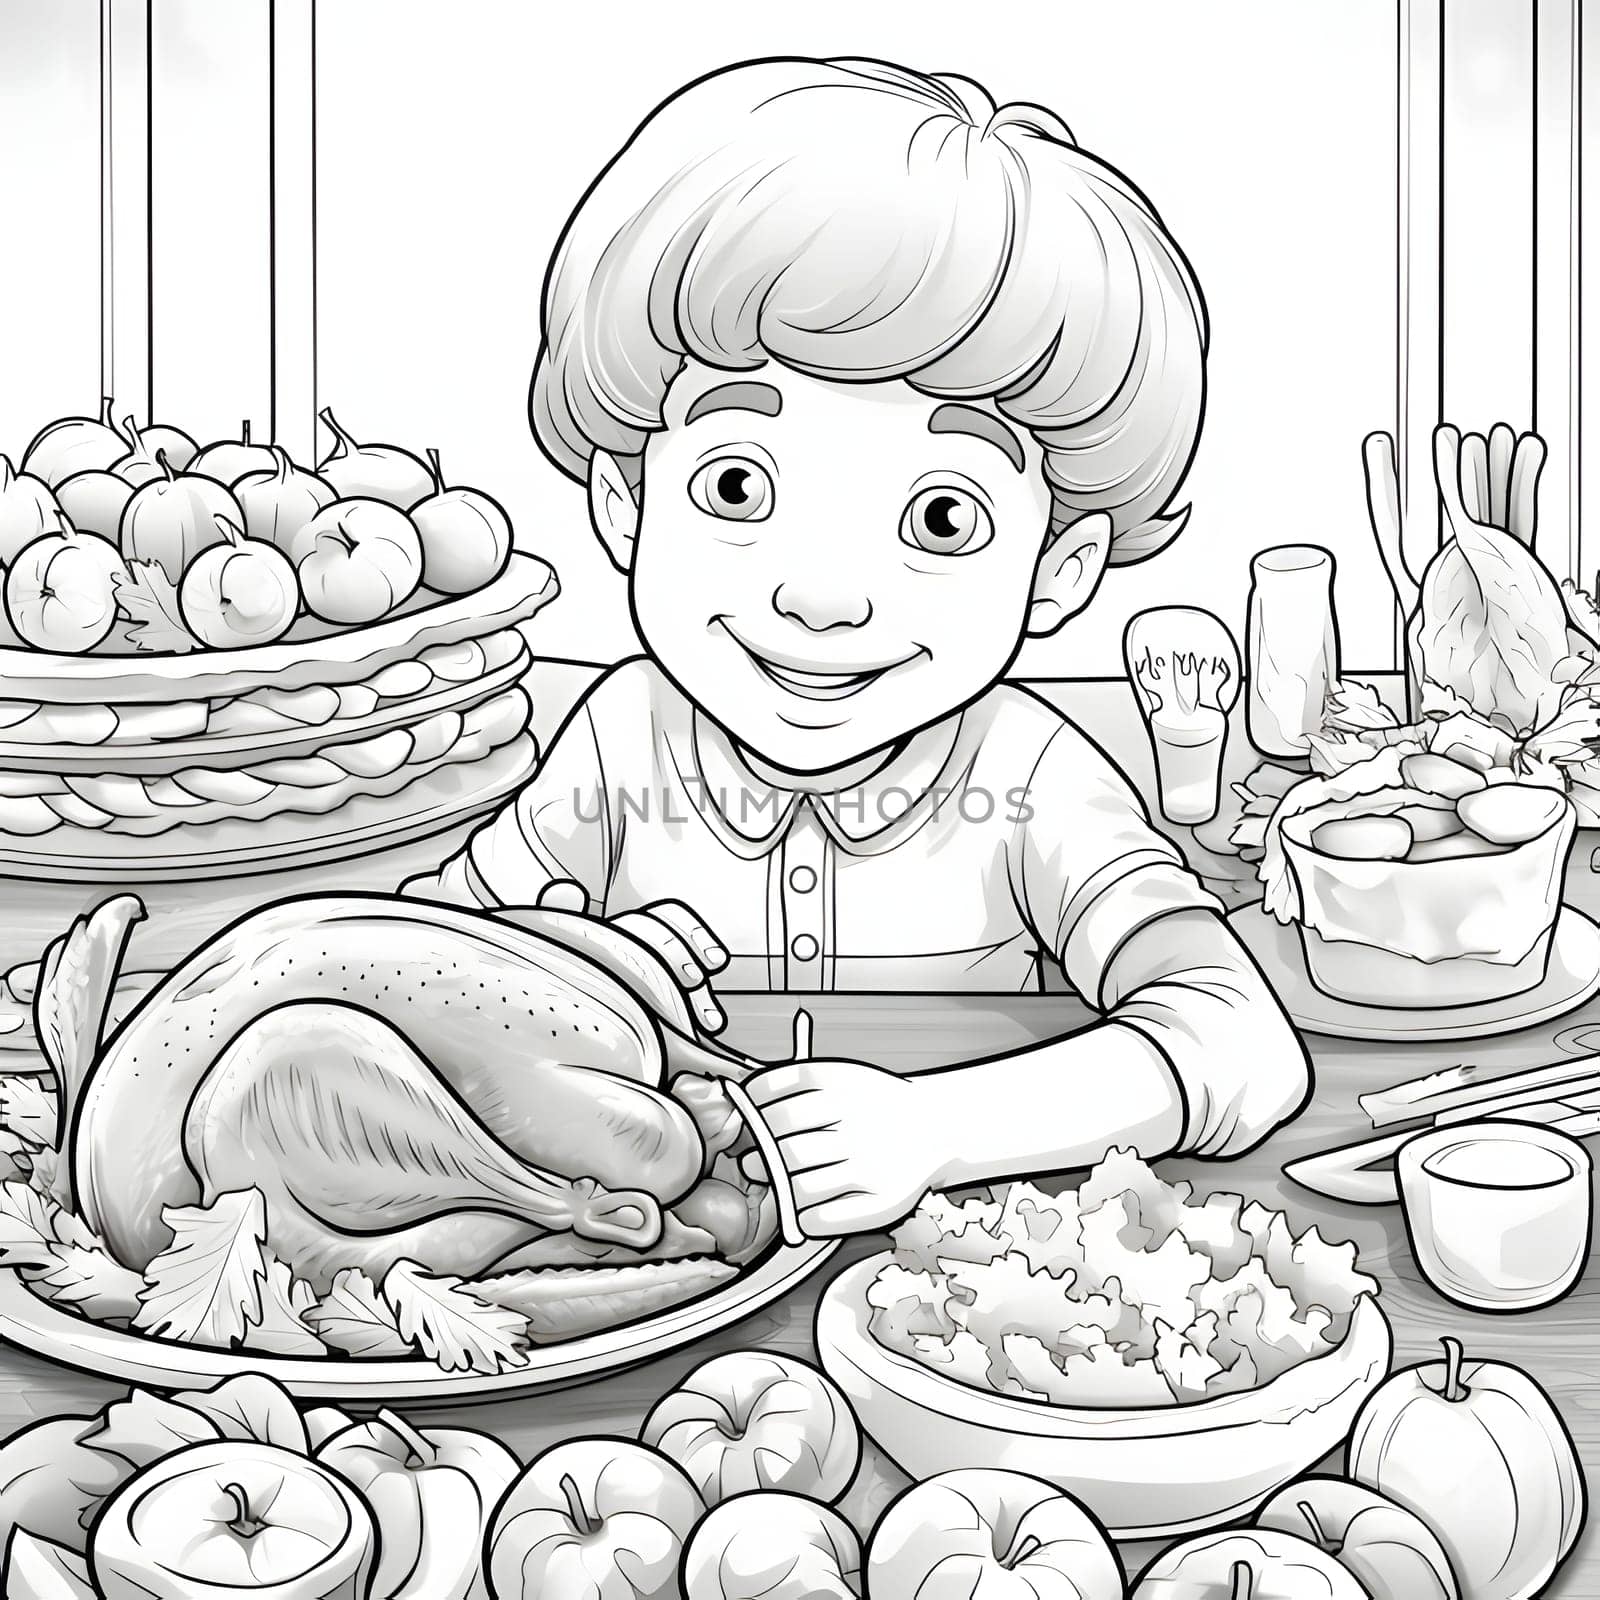 A little boy at the Thanksgiving Day table. Turkey as the main dish of thanksgiving for the harvest. An atmosphere of joy and celebration.